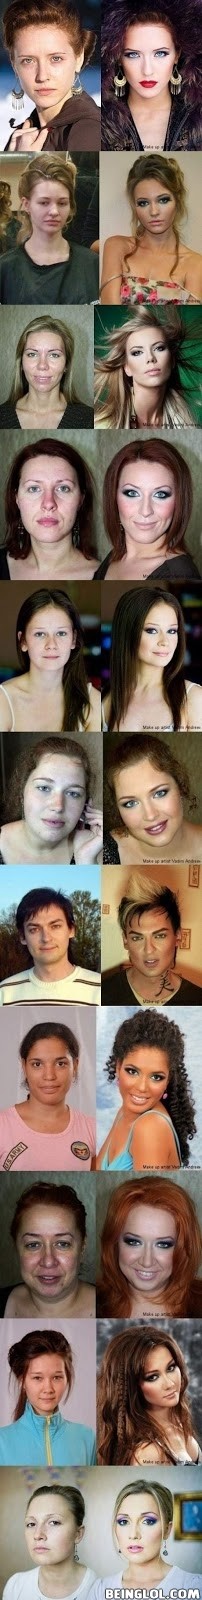 Mother of Make-Up